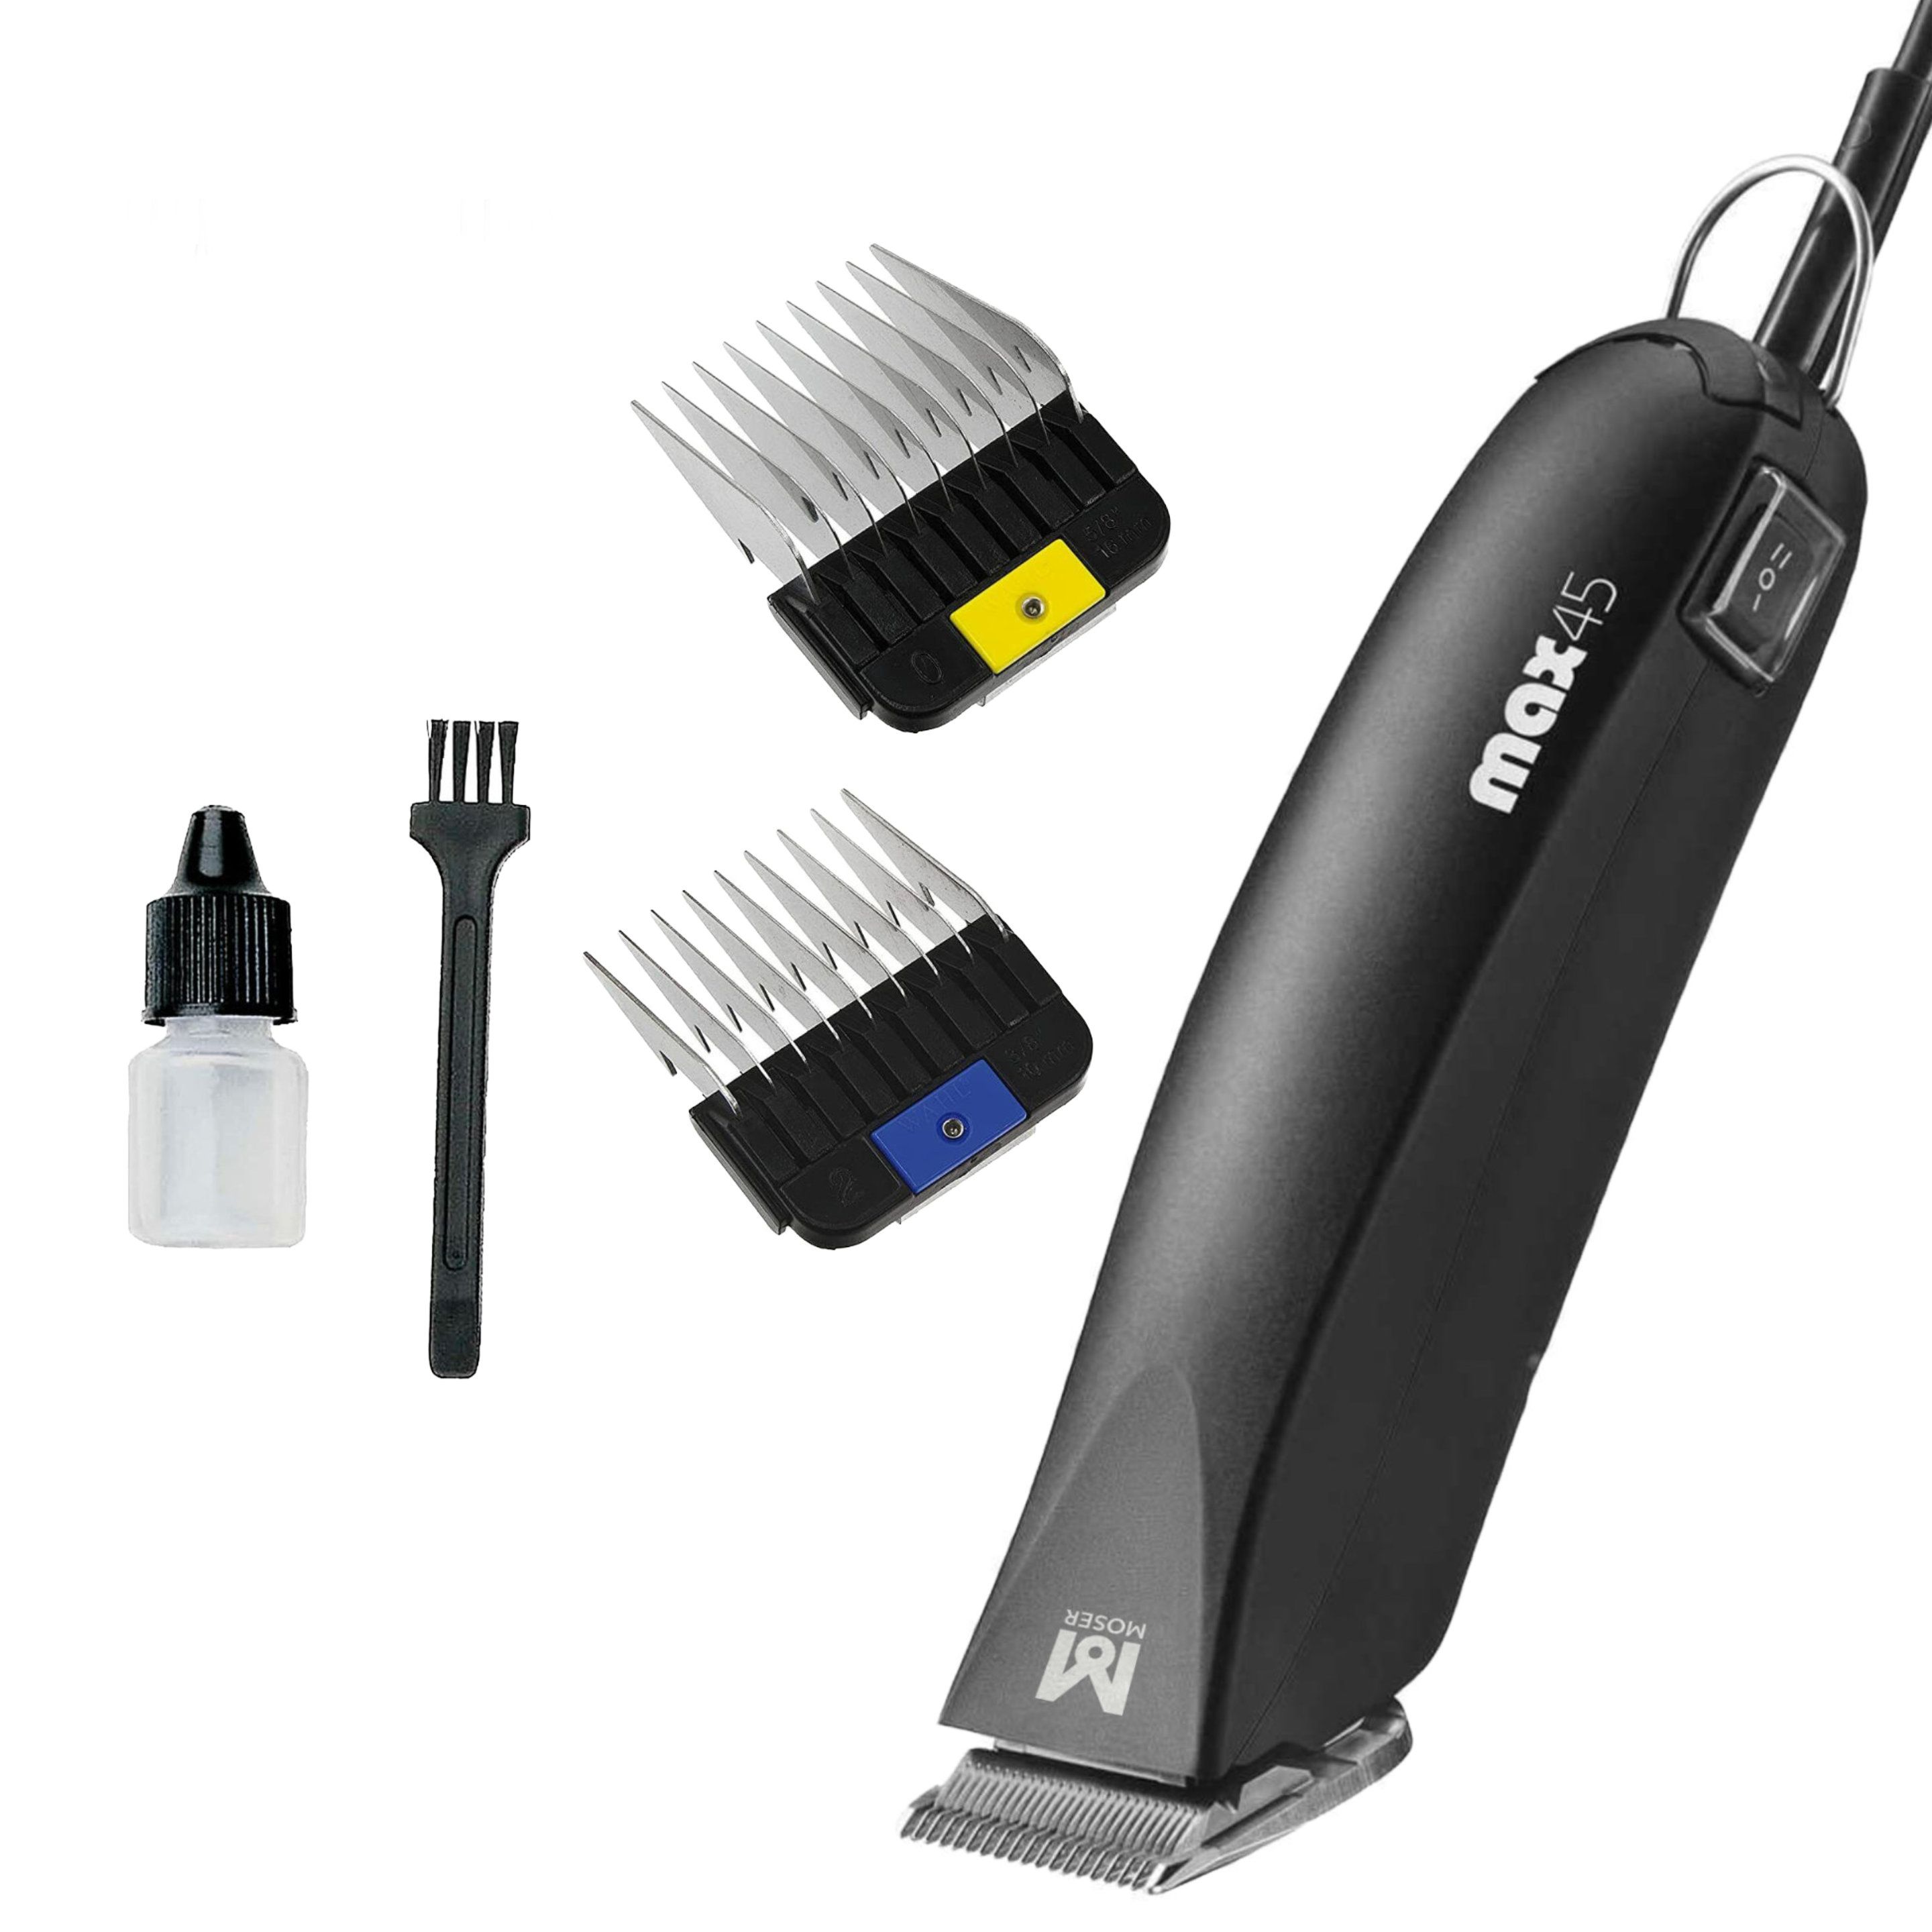 Moser MAX (1245) Professional Strong Animal clipper with 2 Attachment Combs